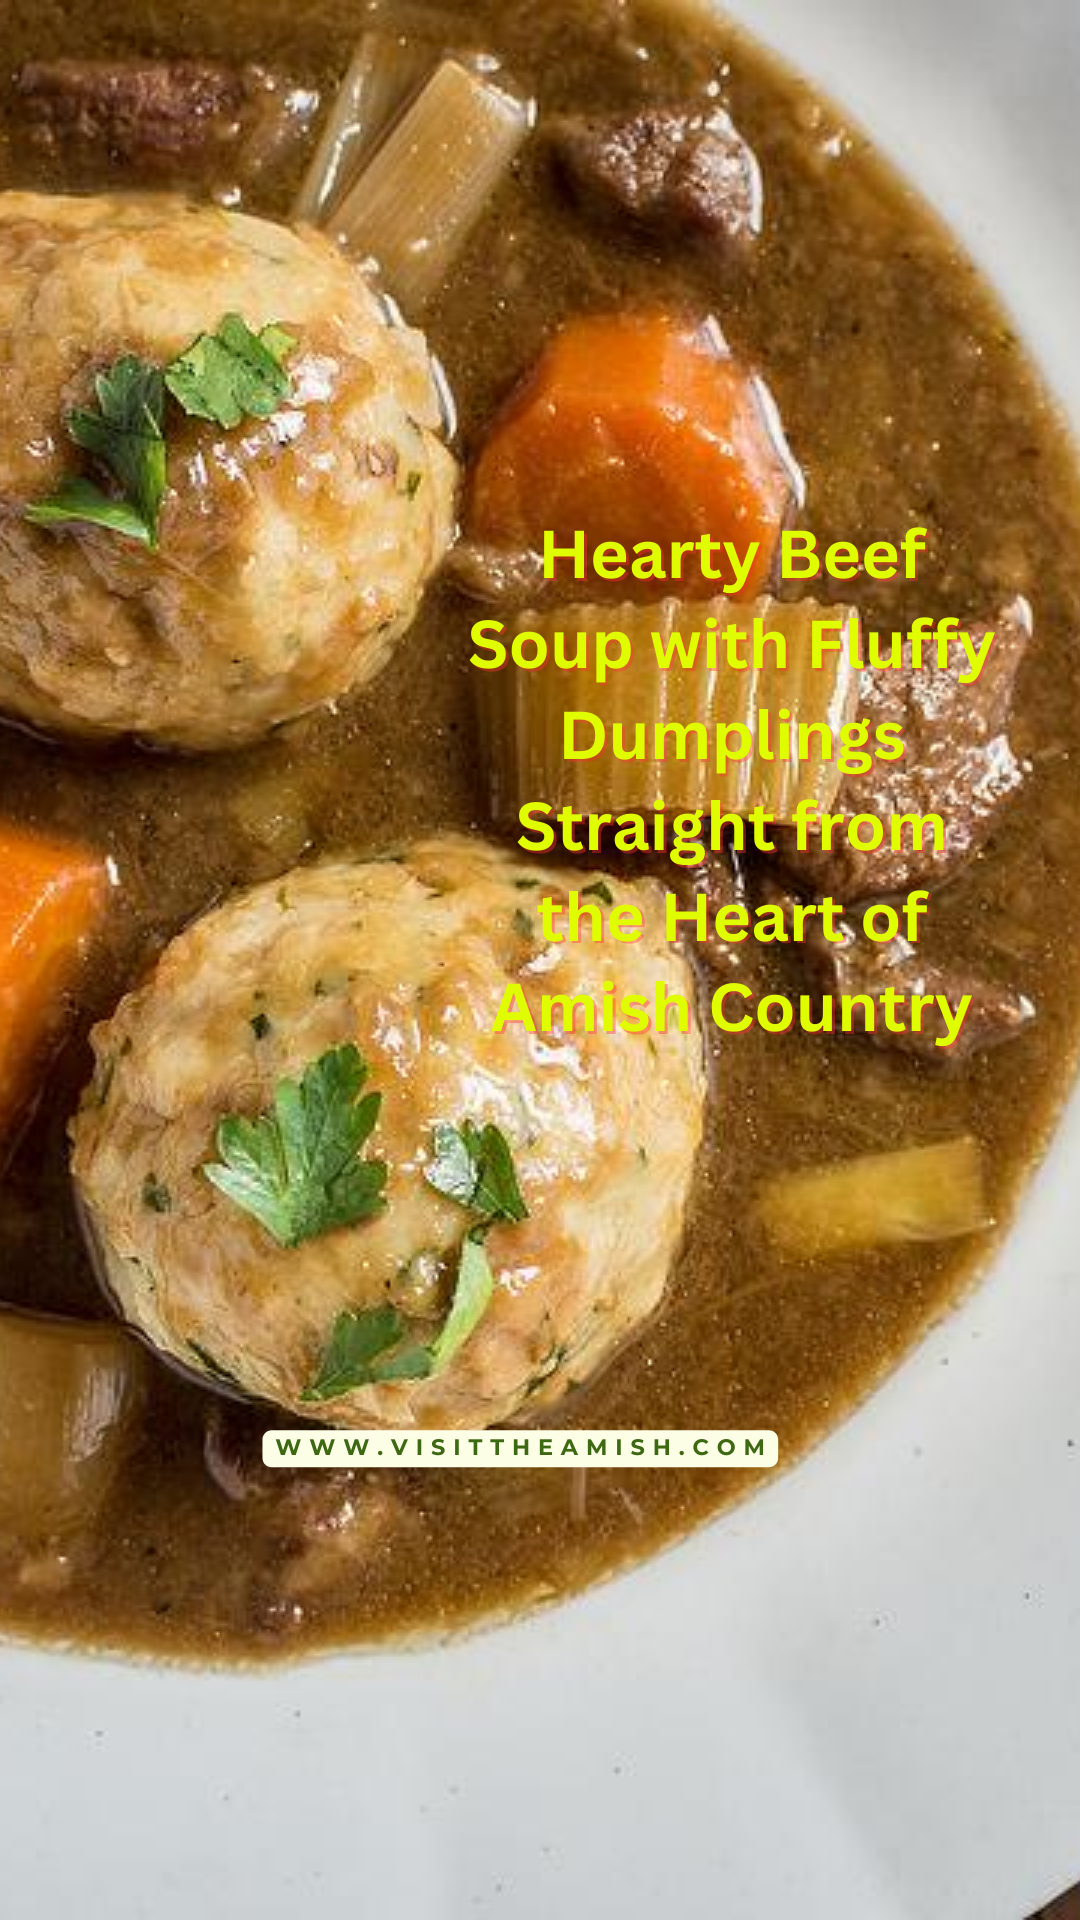 beef soup, dumplings, comfort food, hearty meal, Amish cuisine, traditional recipes, homemade, winter warmers, family dinners